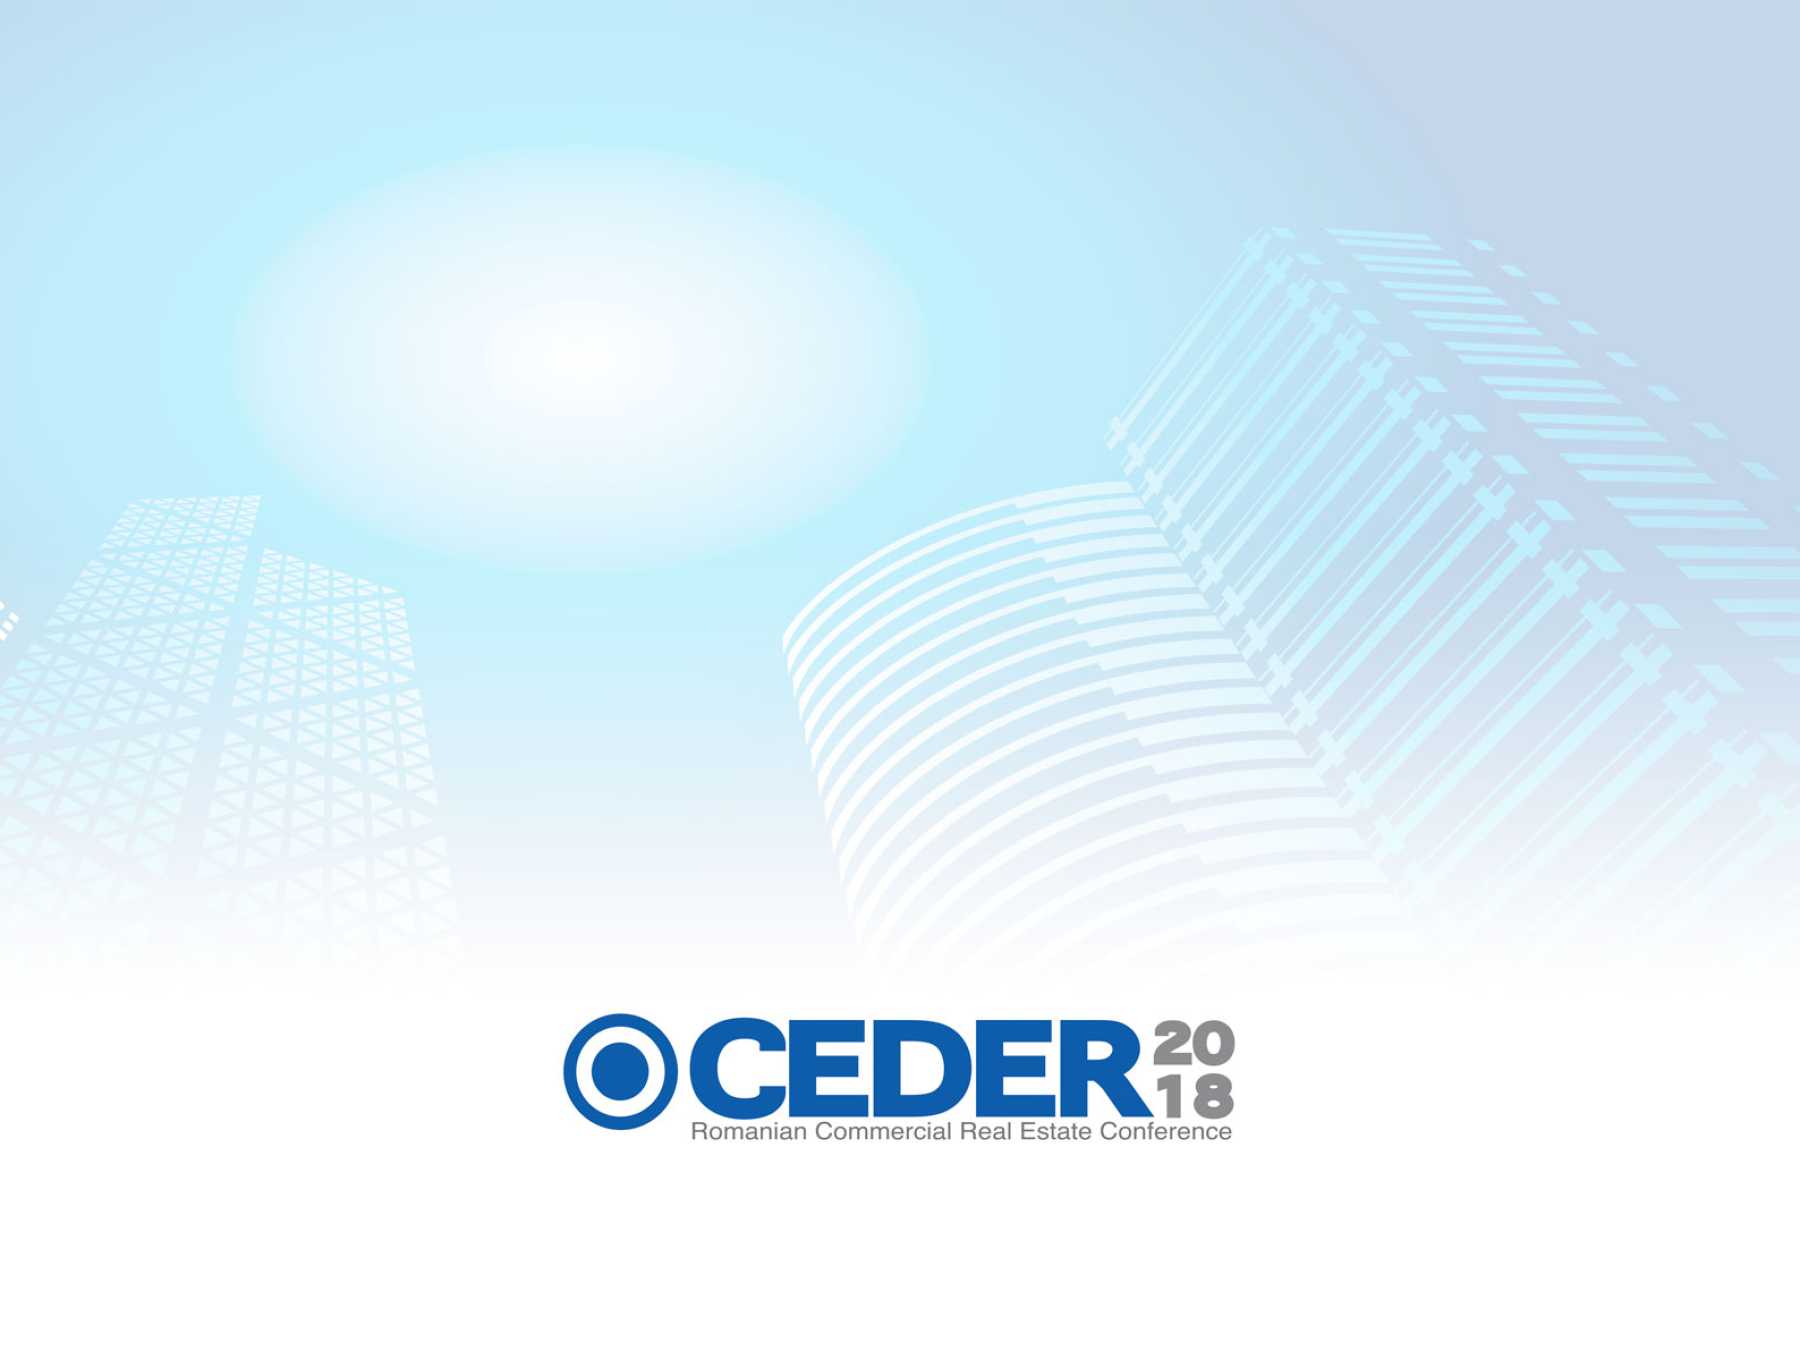 One United Properties is General Partner for CEDER Conference